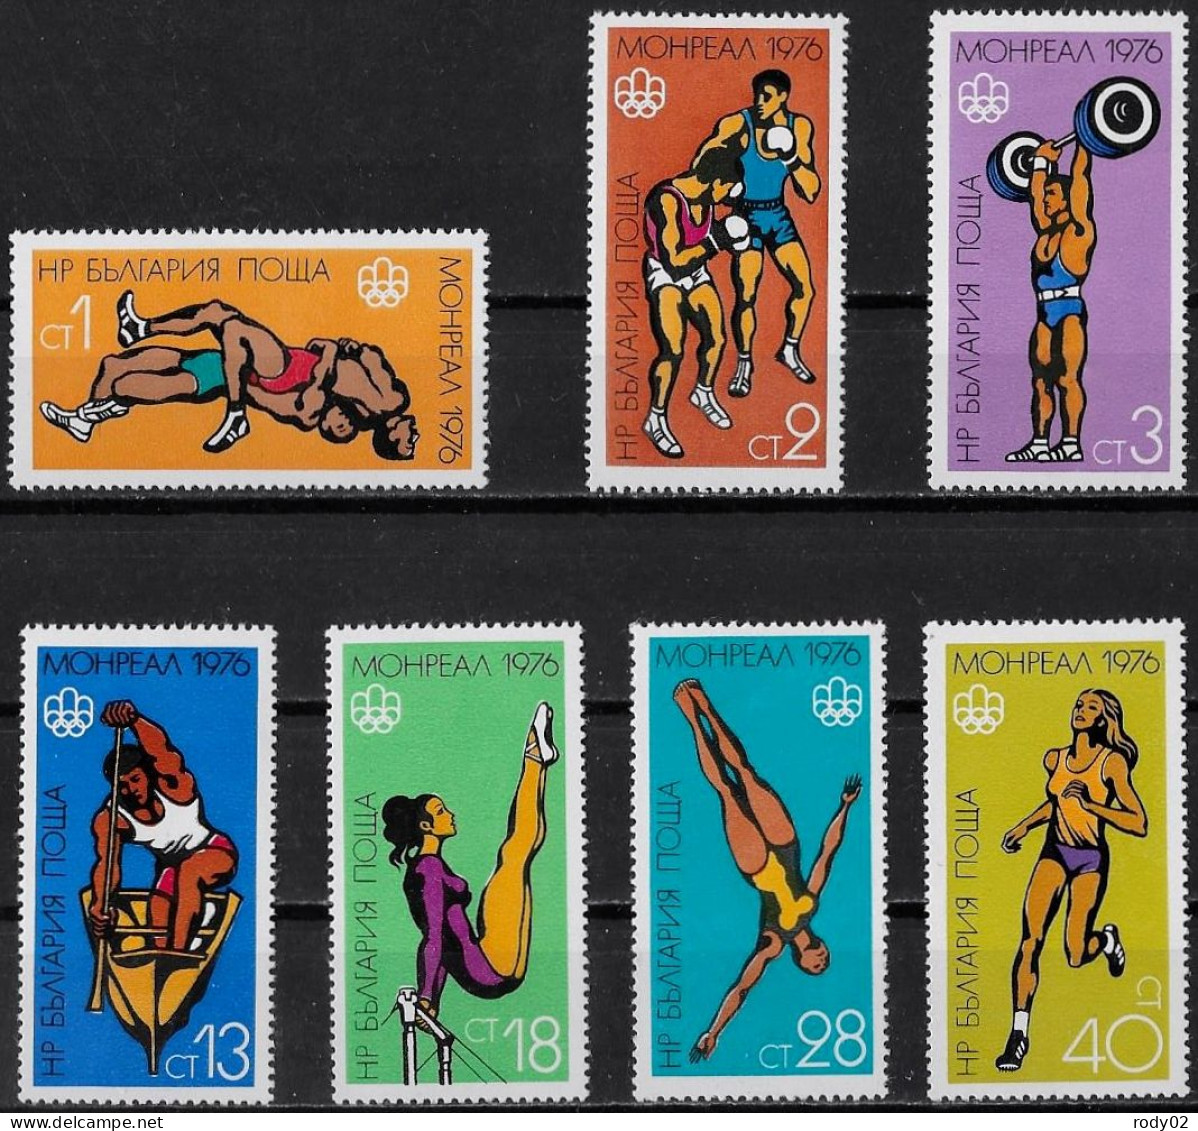 BULGARIE - JEUX OLYMPIQUES DE MONTREAL EN 1976 - N° 2215 A 2221 - NEUF** MNH - Sommer 1976: Montreal